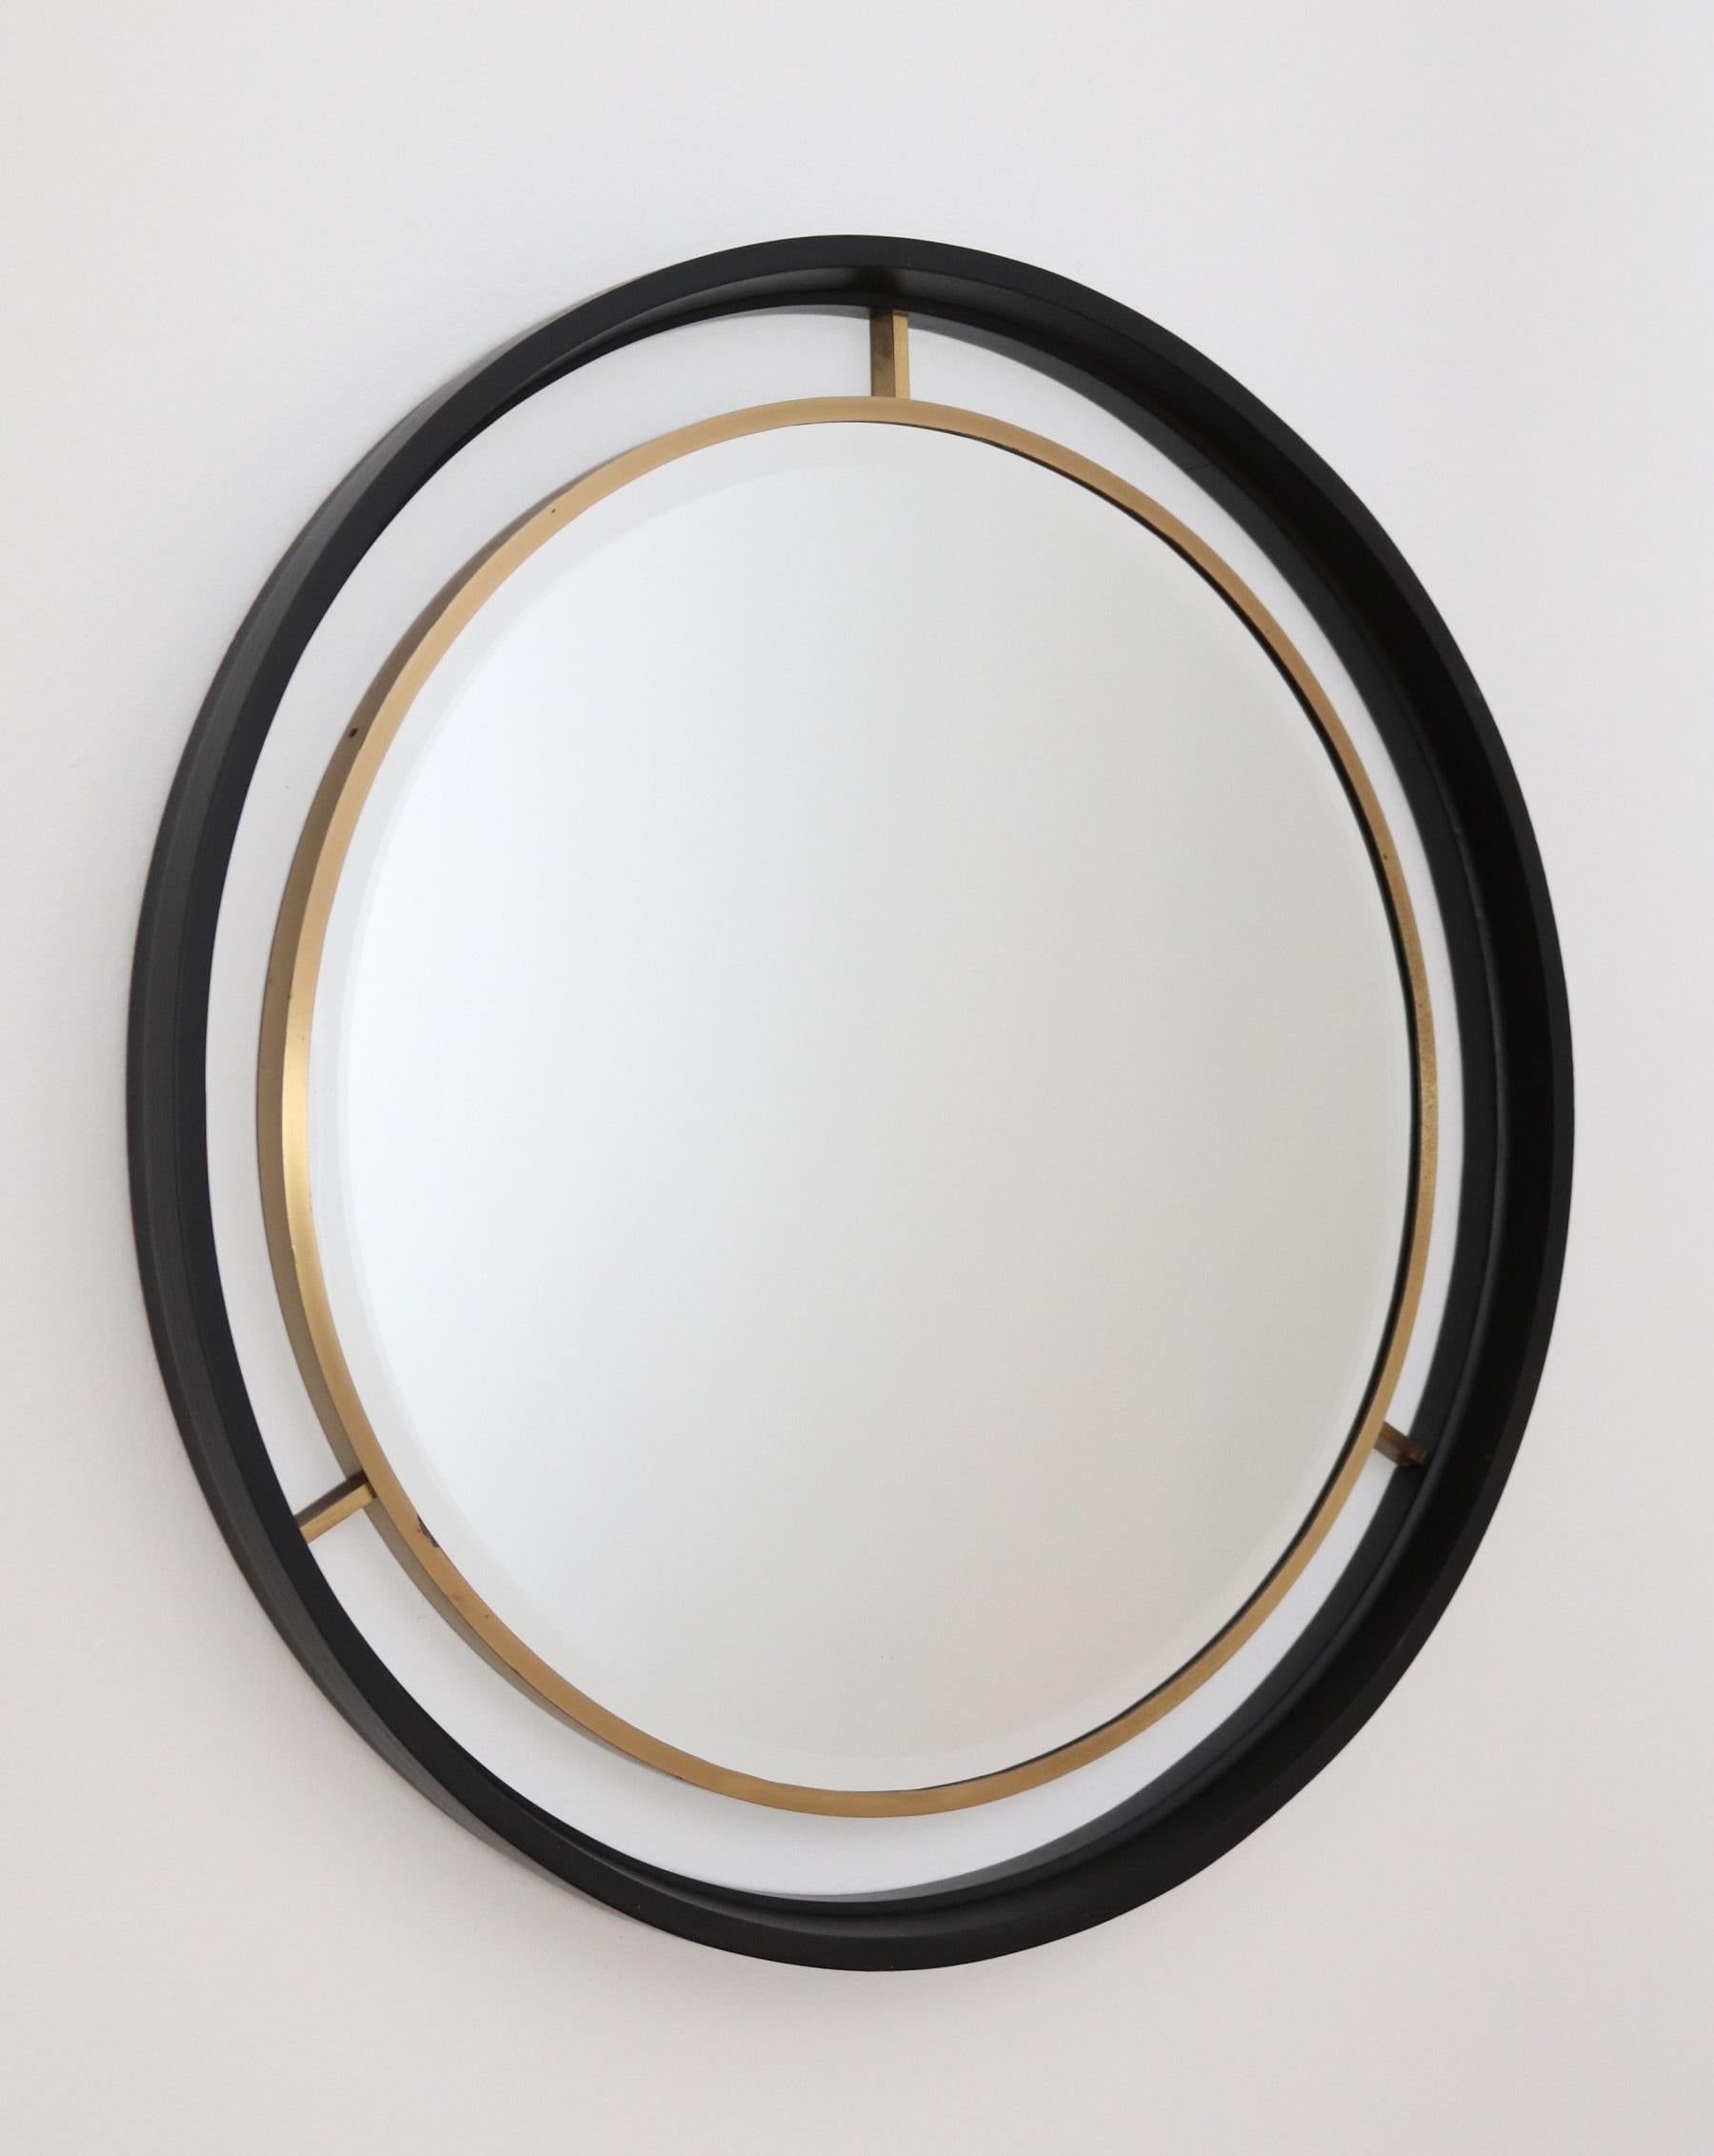 Italian Midcentury Wall Mirror with Cut Glass, Brass and Plywood Frame, 1960s 11